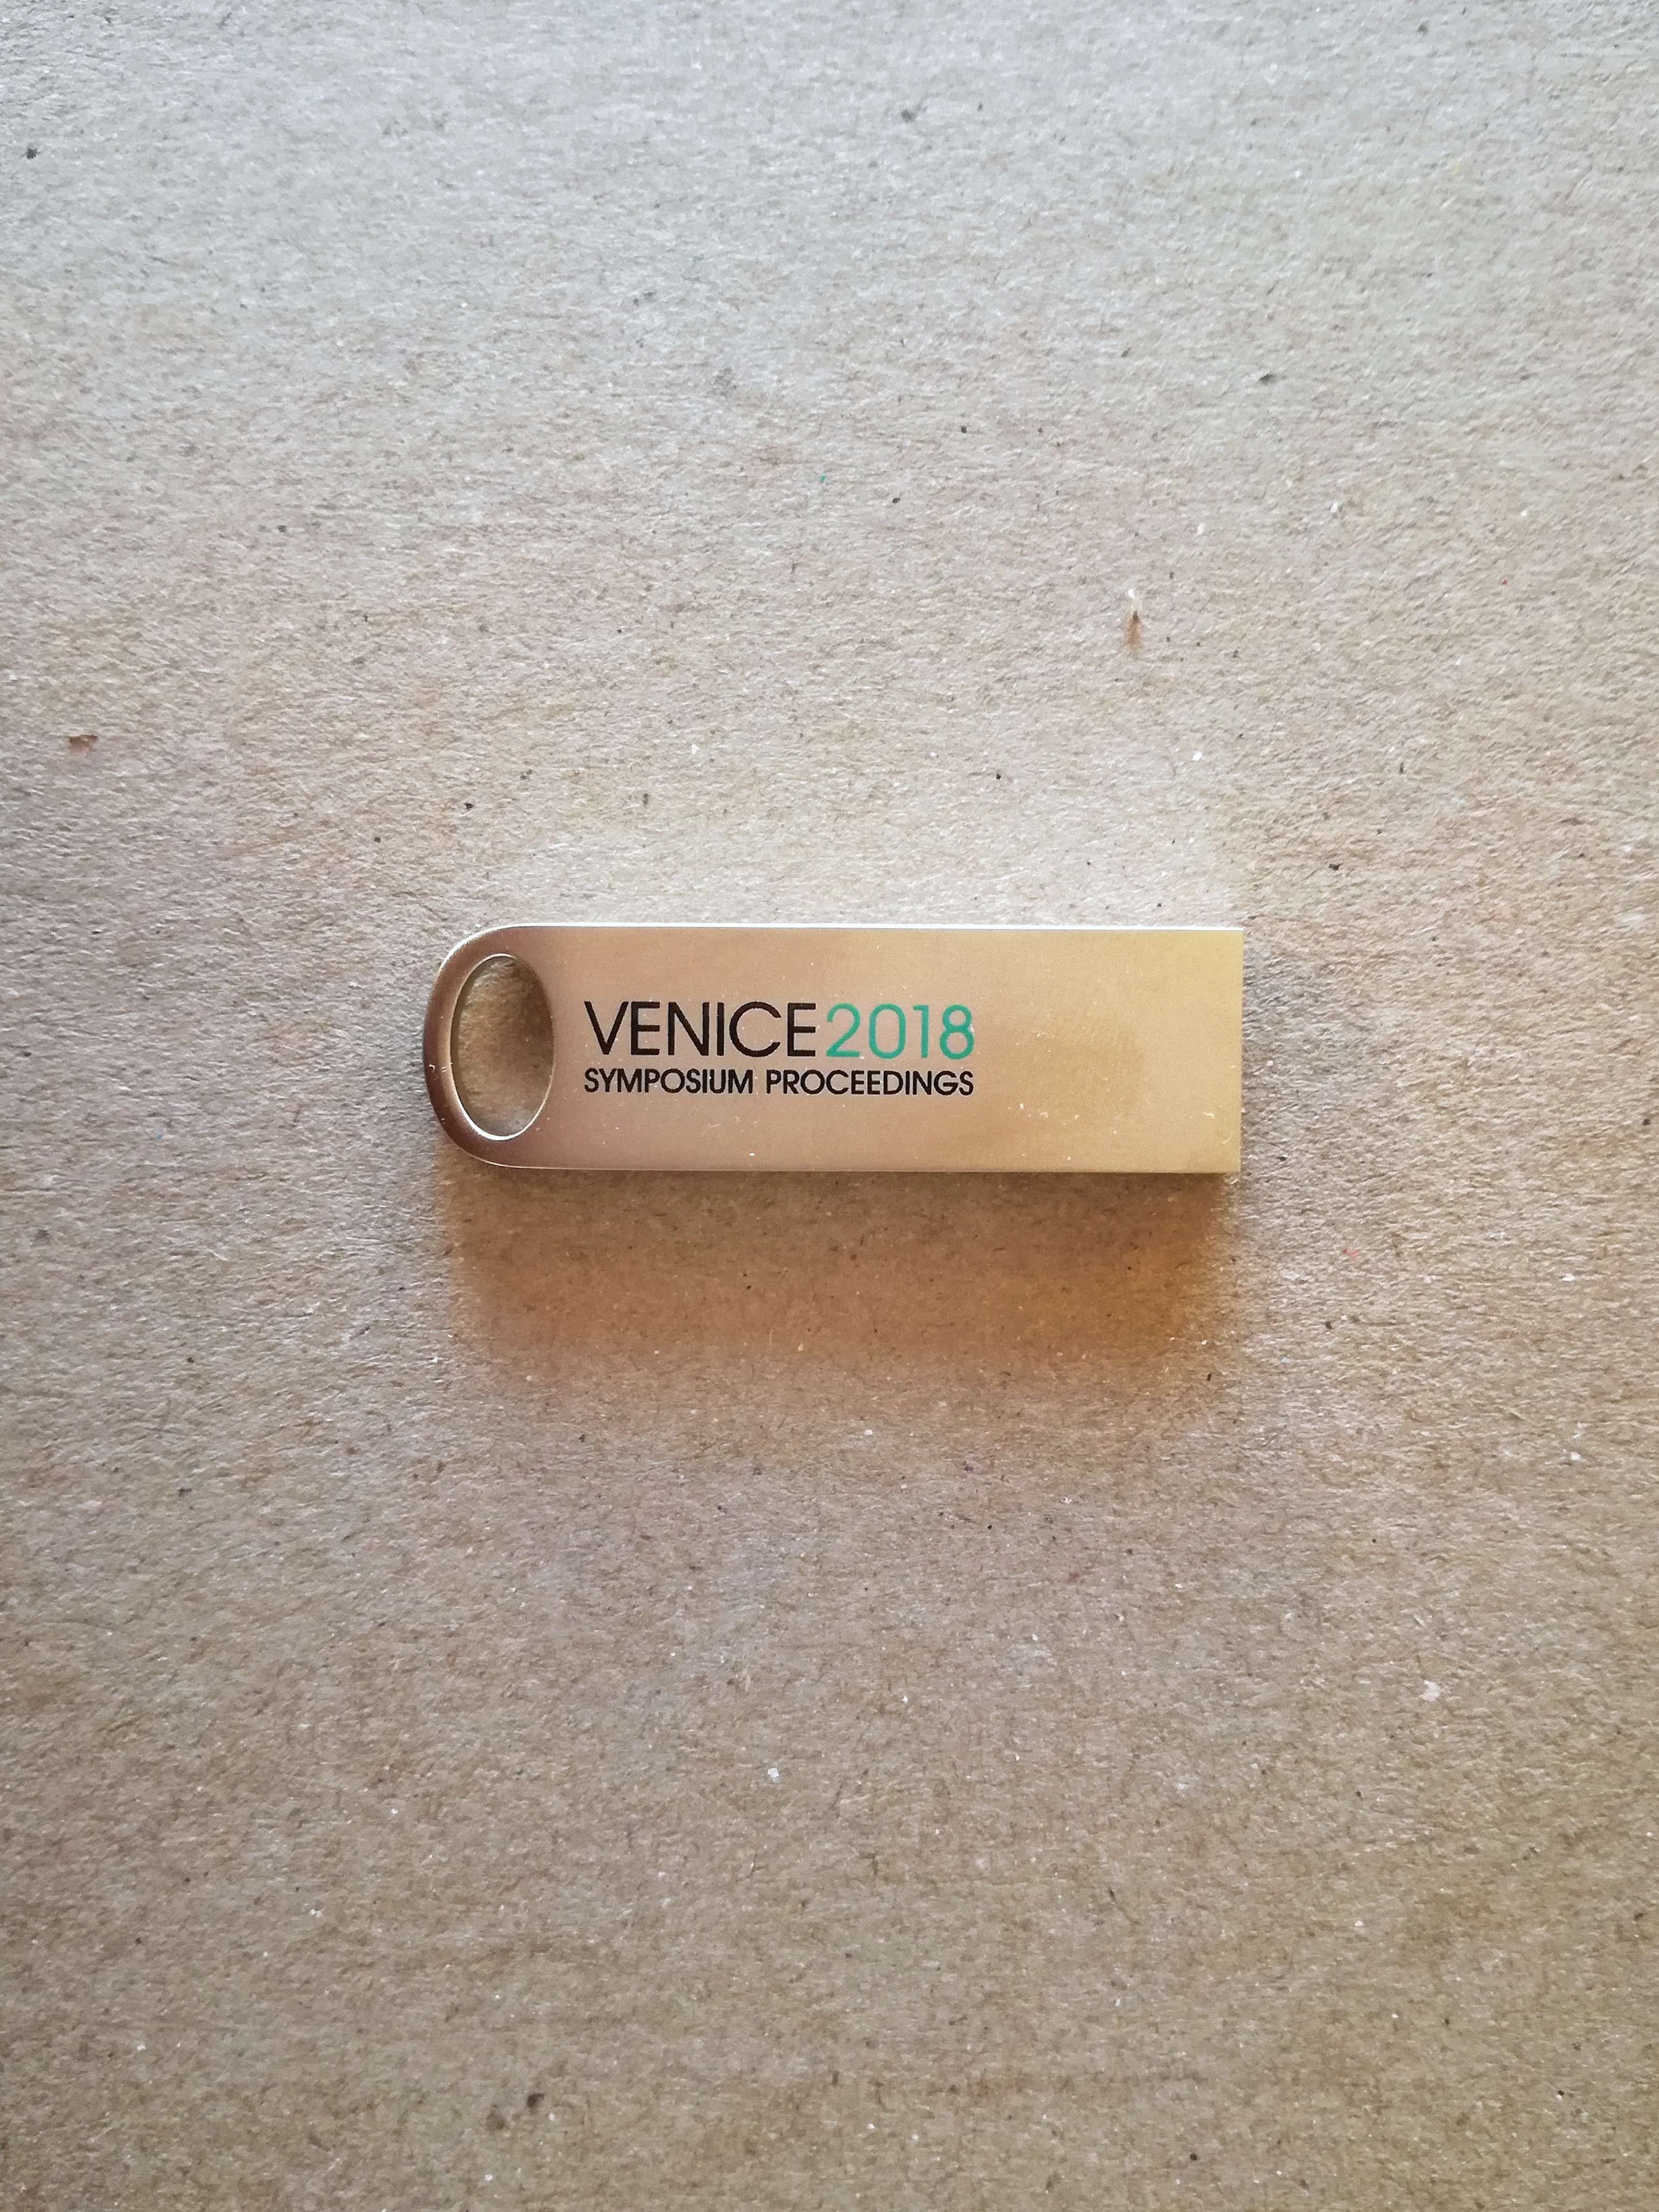 Venice 2018</br>7th International Symposium on Energy from Biomass and Waste (USB pendrive)